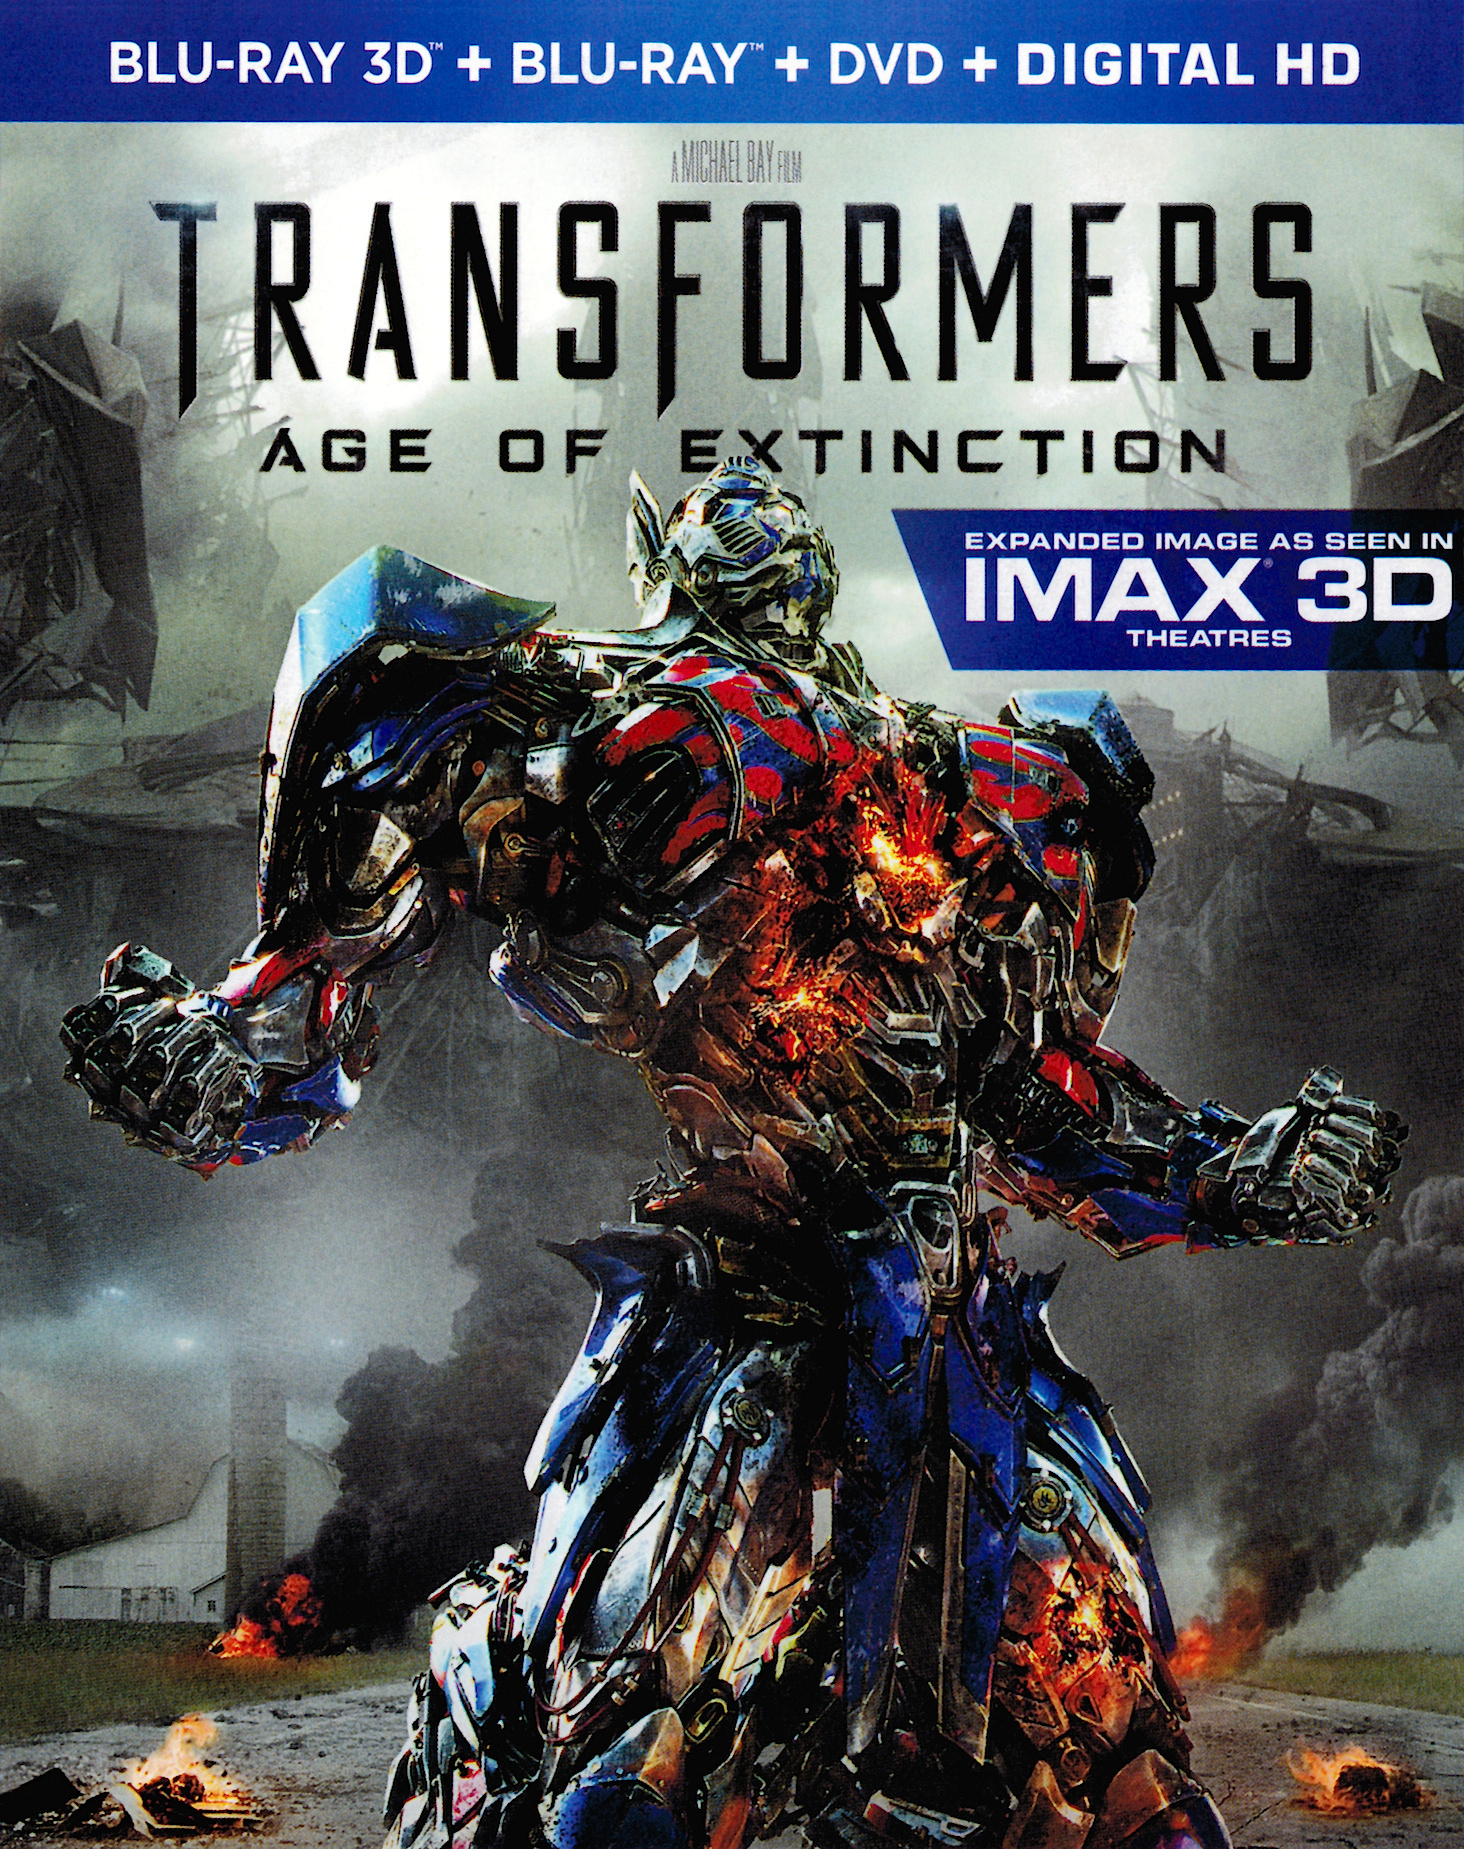 Transformers 4 Full Movie Free Download Torrent